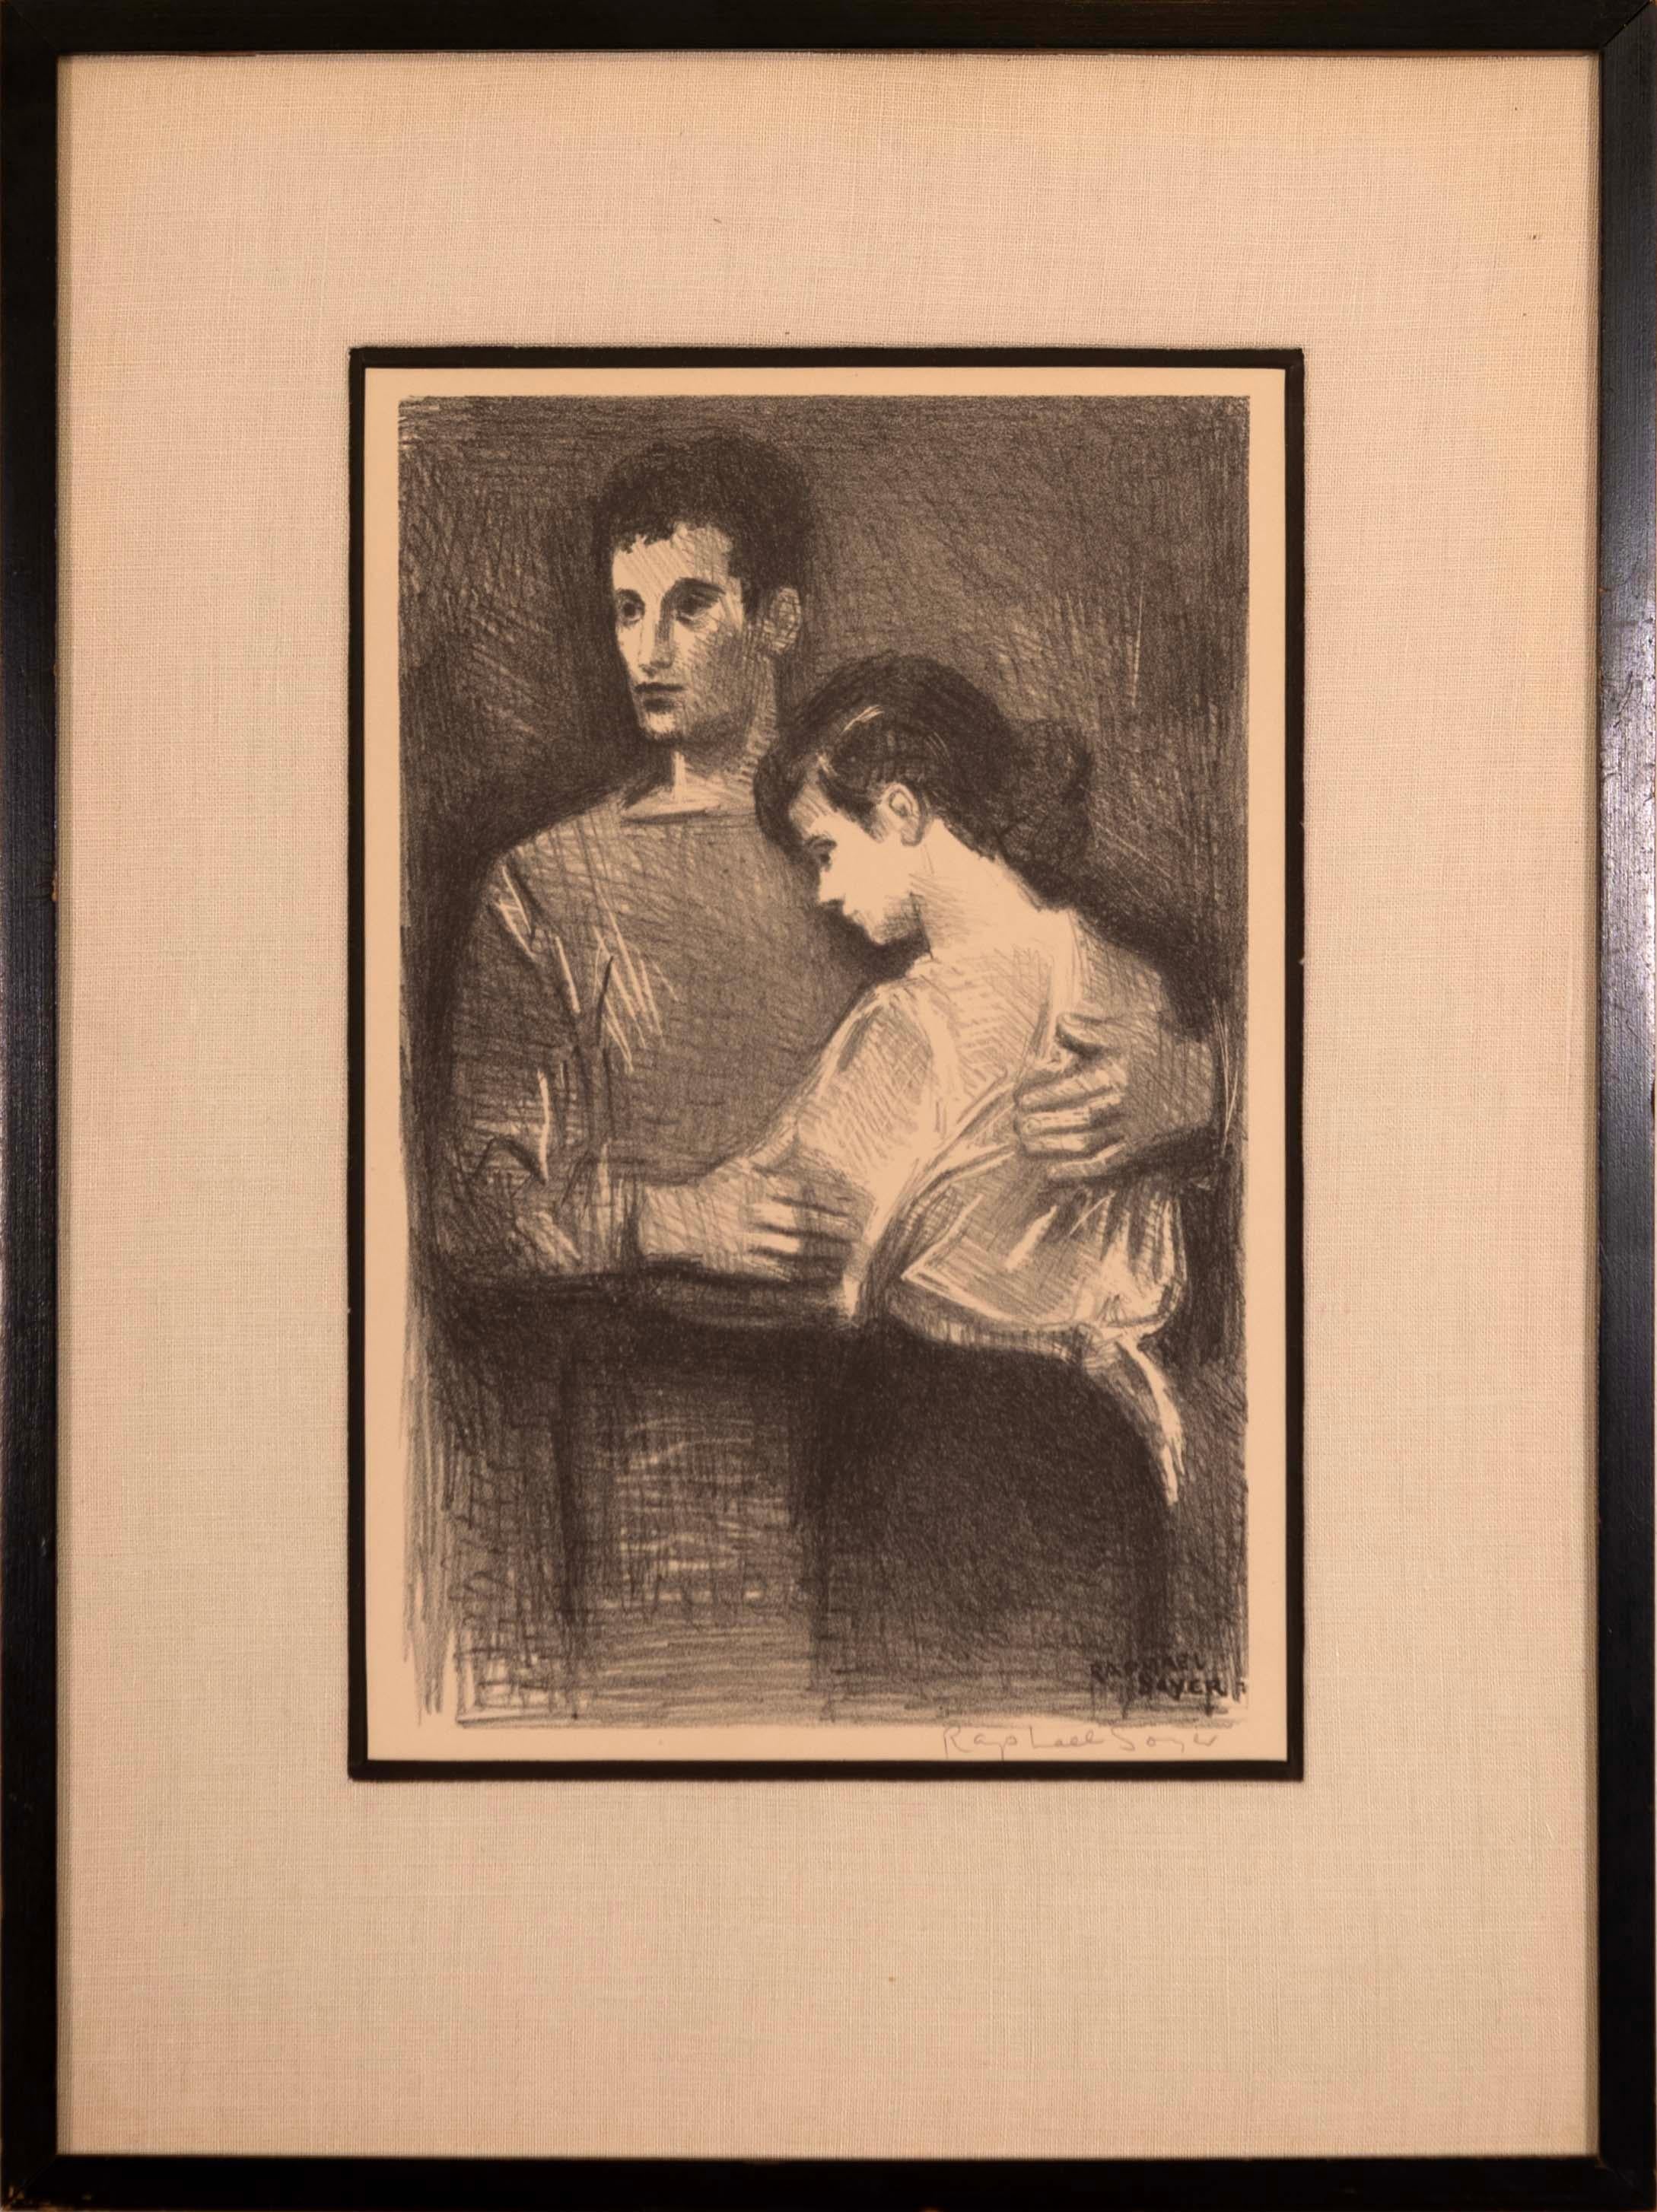 A sentimental lithograph on paper titled “Boy & Girl” by American artist Raphael Soyer. Hand signed in pencil on the bottom right. Published by Associated American Artists, New York in 1954. Raphael Soyer (1899-1987) was a painter, draughtsman, and